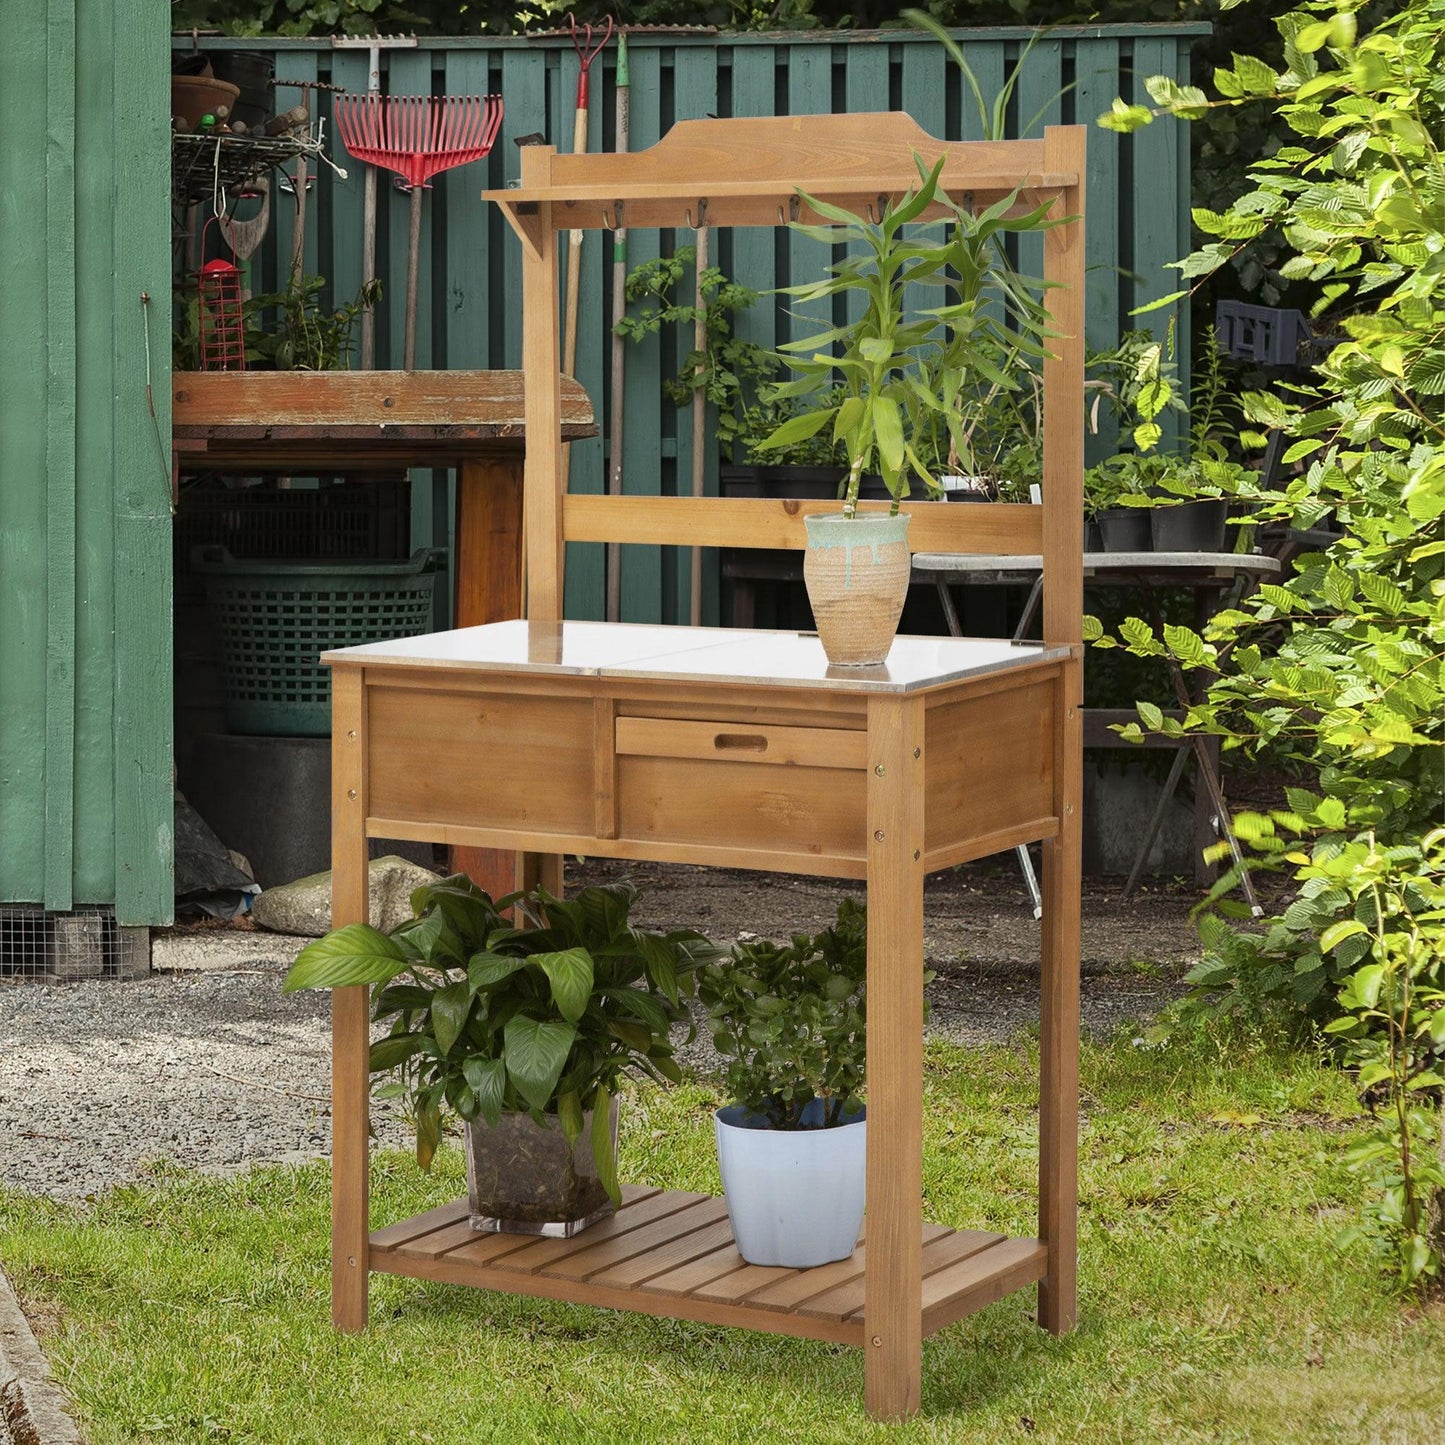 Outsunny Wooden Garden Potting Table with Sink and Storage - ALL4U RETAILER LTD